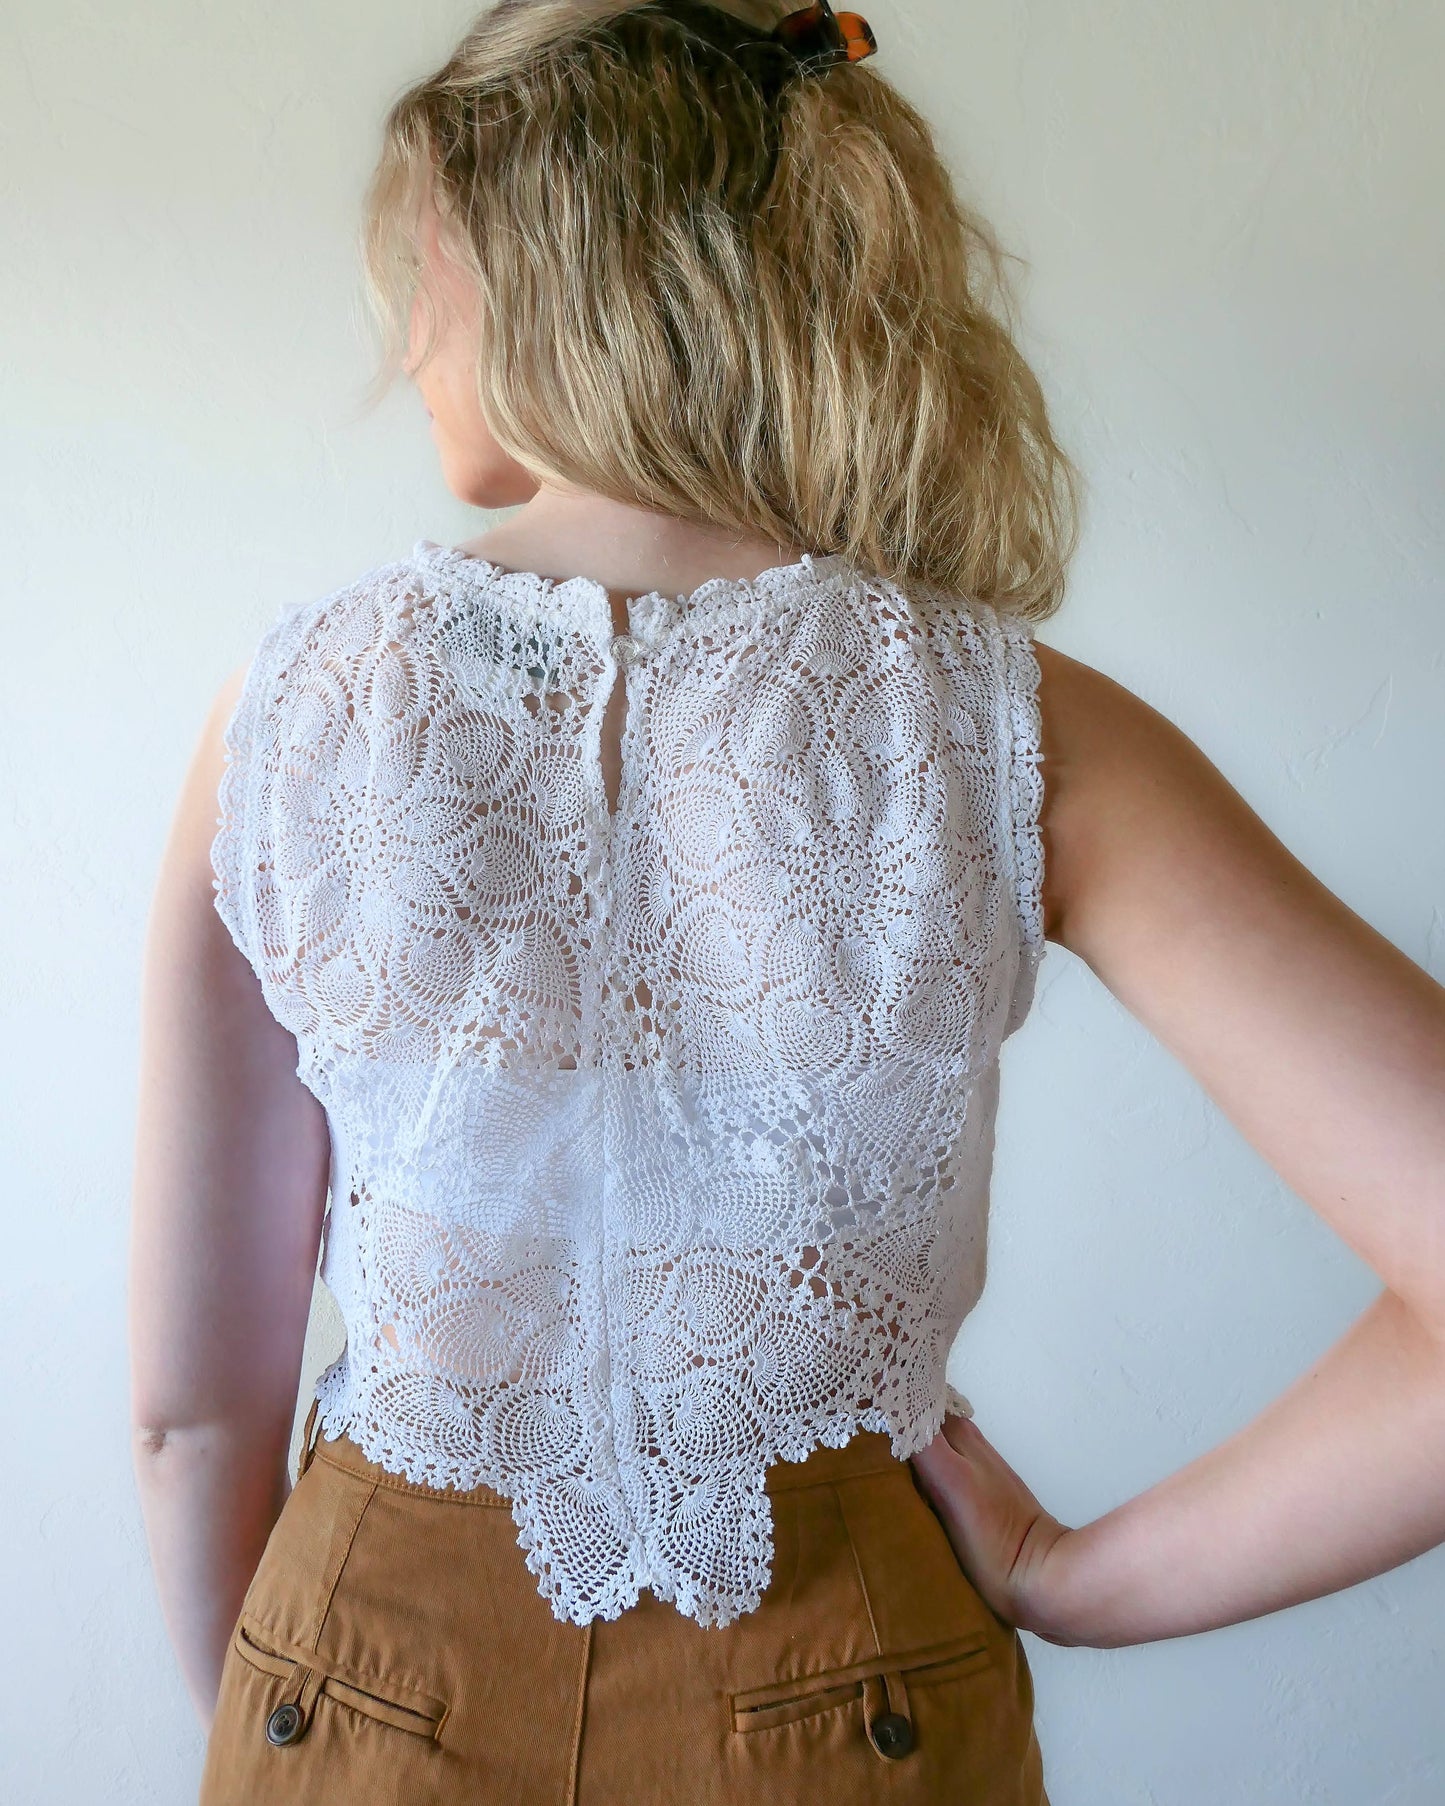 Back view of peace lotus motif crop tank top. An ultra casual, hip, and boho-chic crop tank top made with interconnected flower doilies reminiscent of the white lotus, which symbolizes peace, tranquility, and calmness.  Lace trim at the collar and sleeve. 